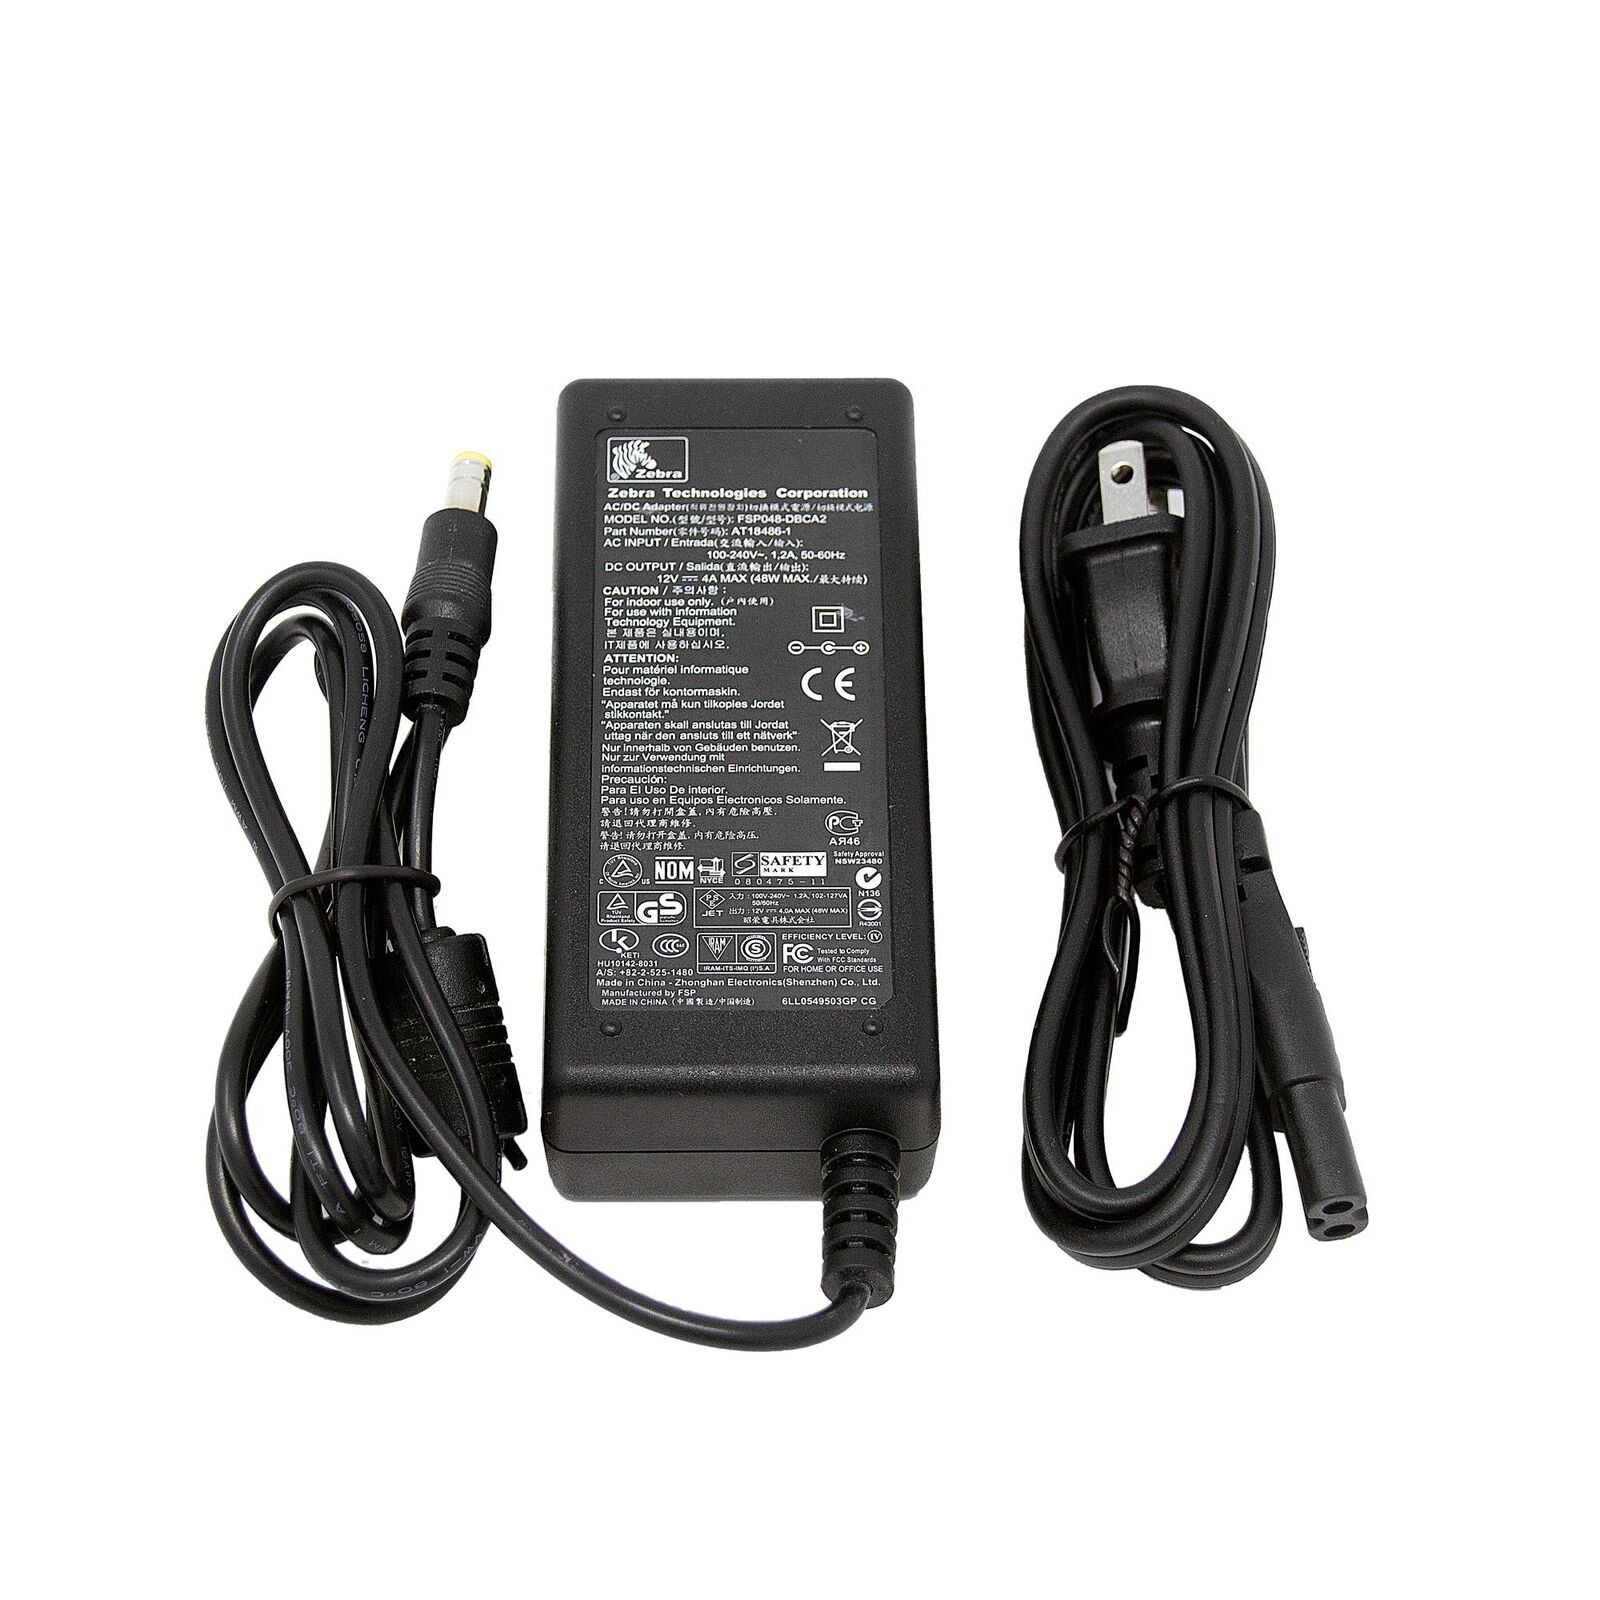 ZEBRA  P4T Mobile Printer 48W Genuine AC Power Adapter Charger